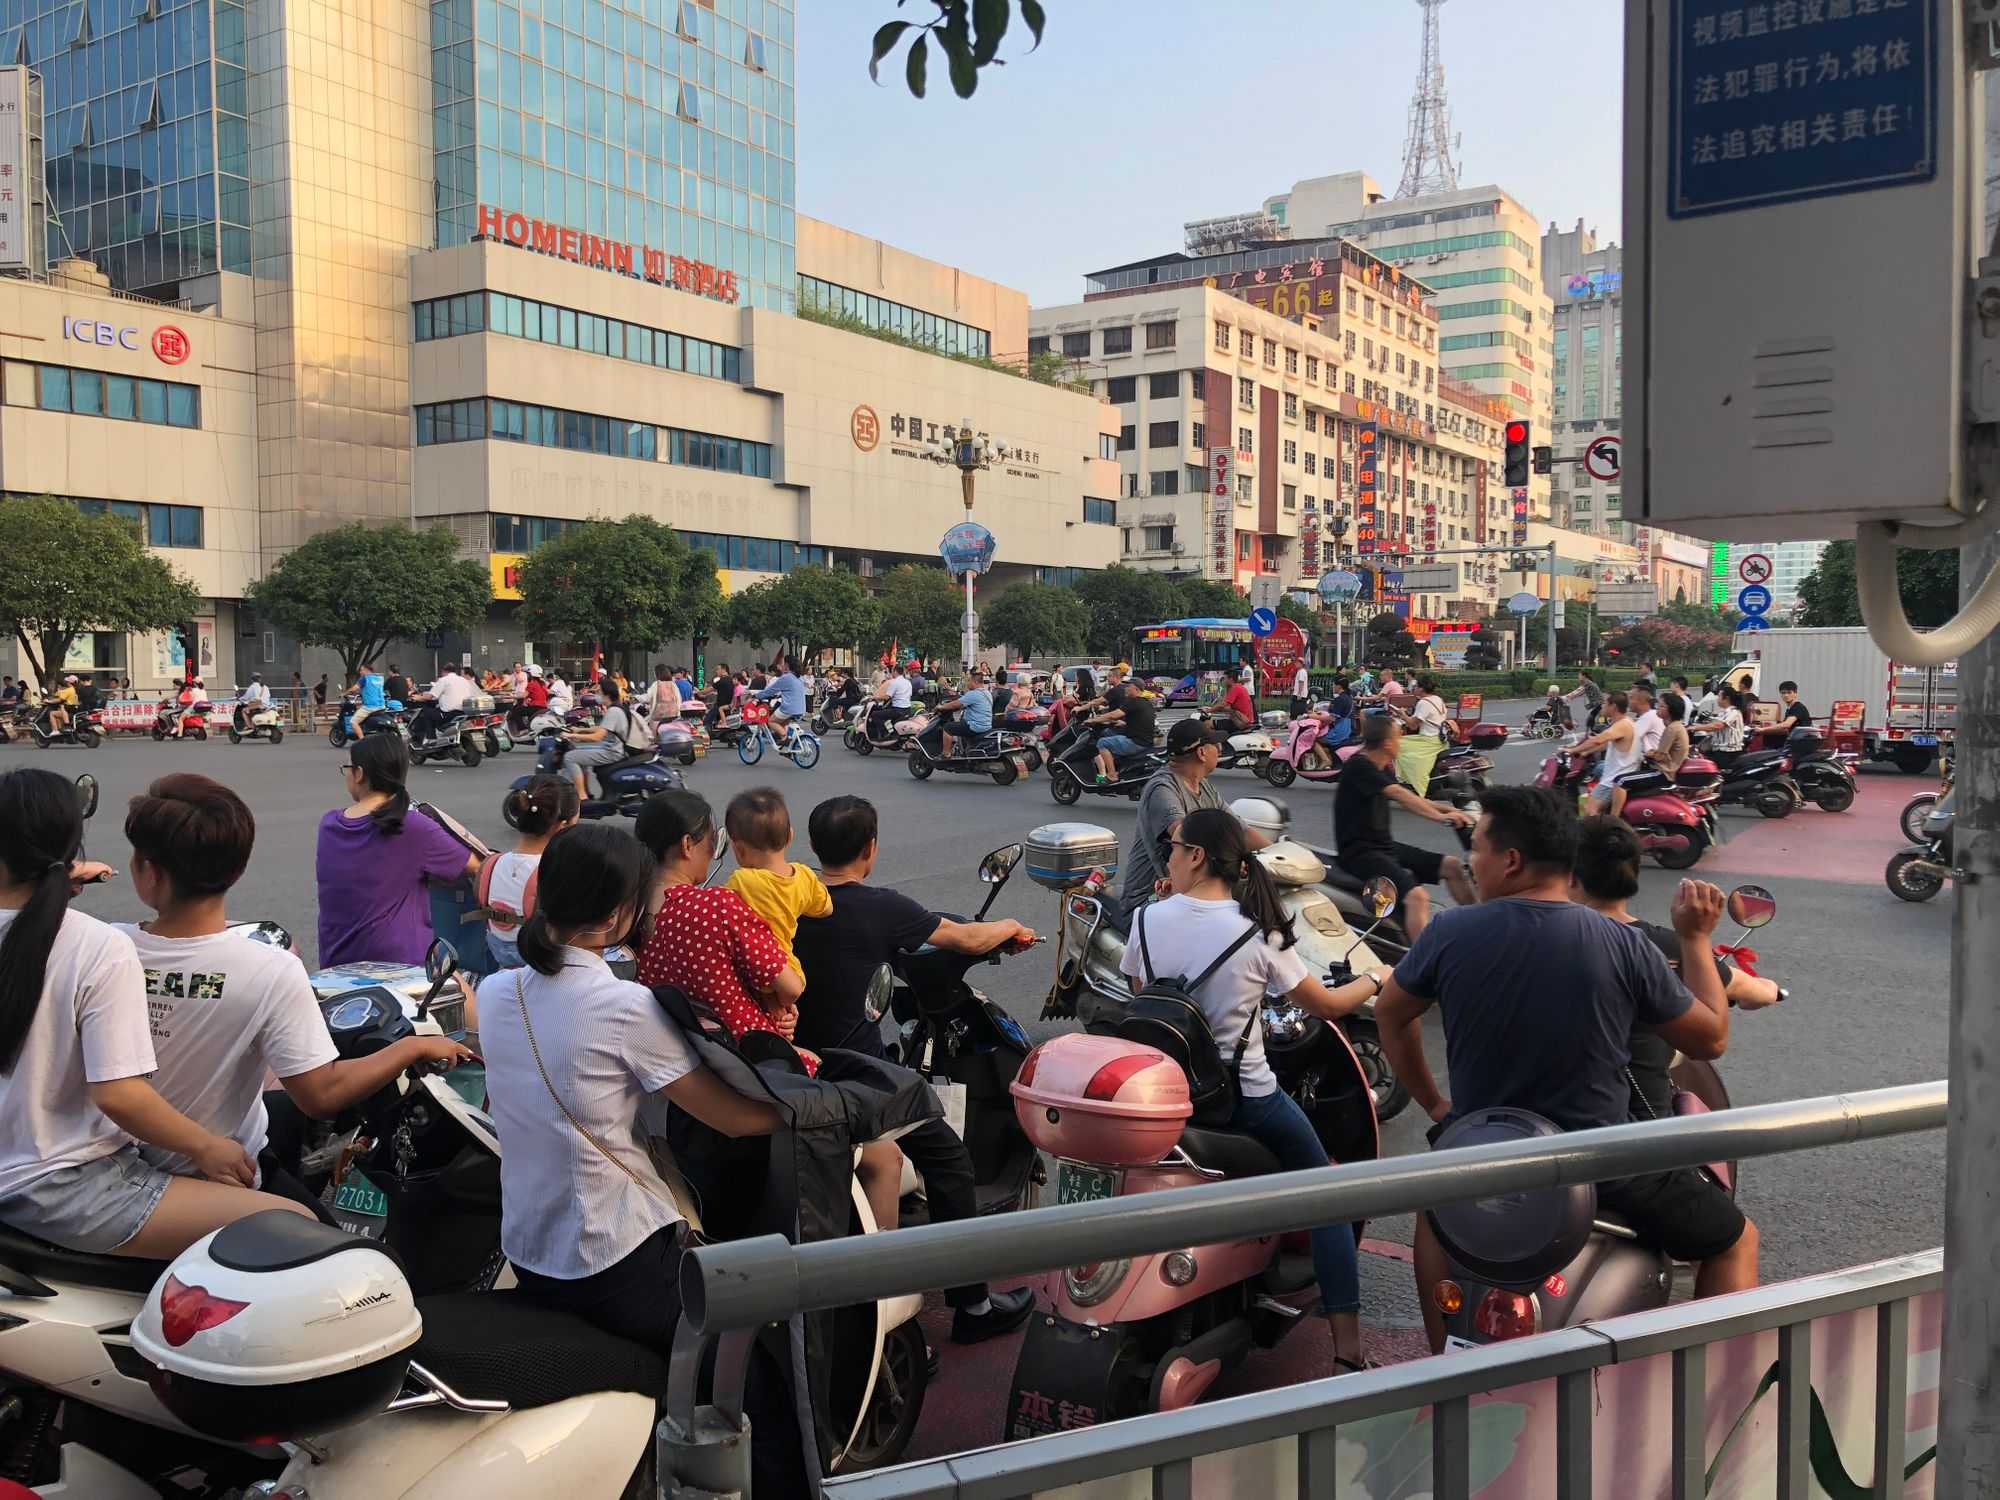 Busy Guilin street - Motorcycles coming in all directions (Image by author)